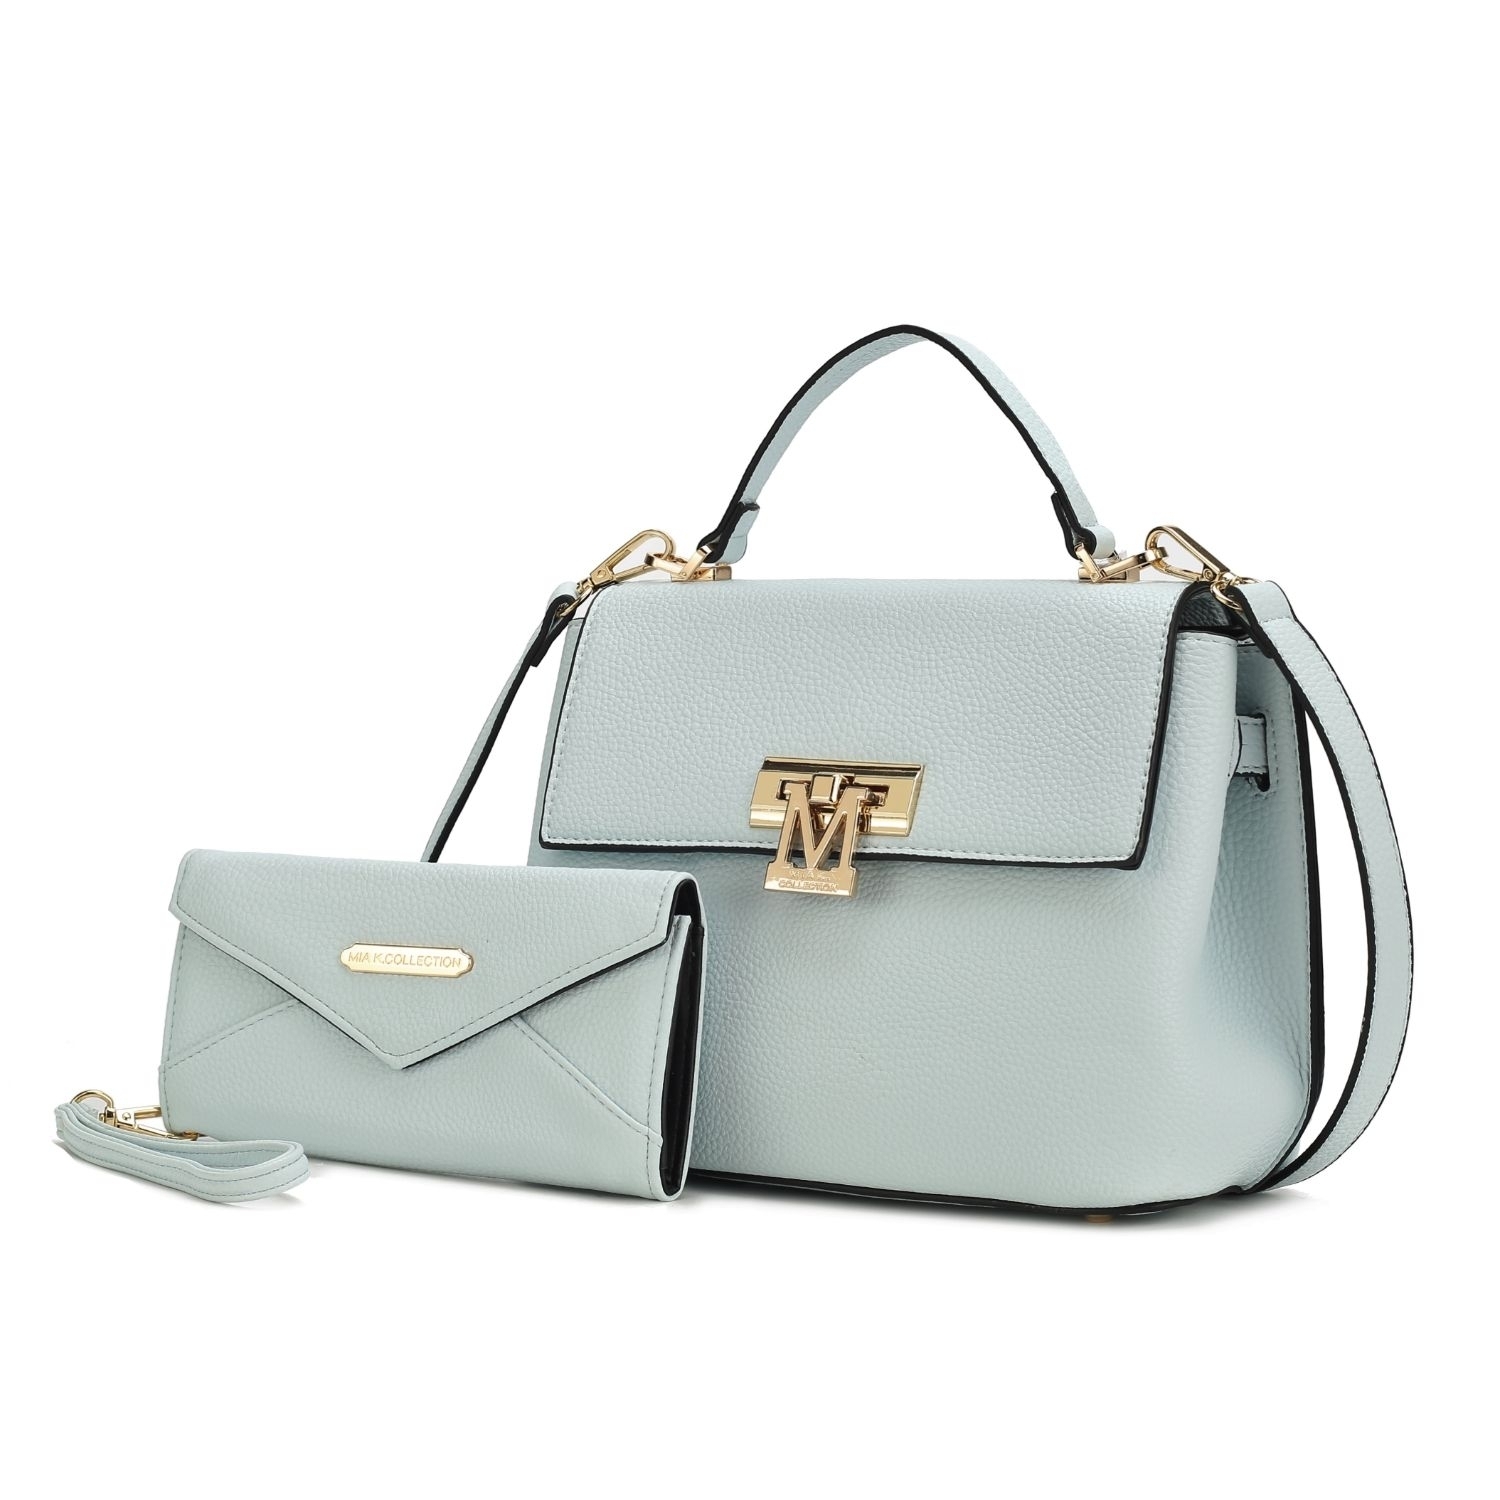 MKF Collection Hadley Vegan Leather Women's Satchel Bag With Wristlet Wallet - 2 Pieces By Mia K - Light Blue